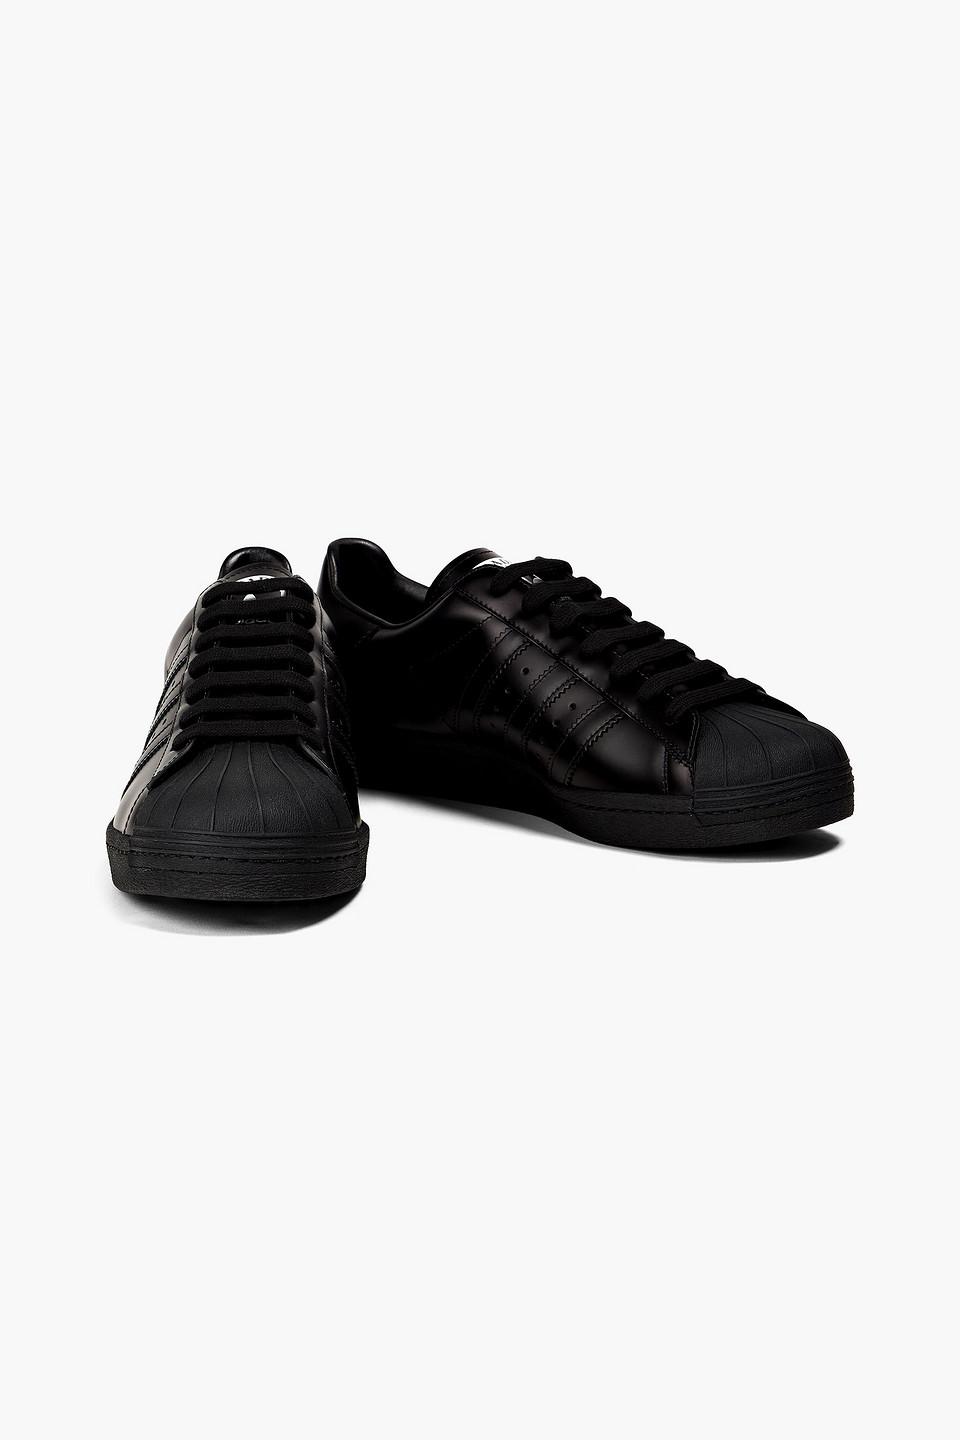 adidas Perforated Men for Leather in Black Lyst | Sneakers